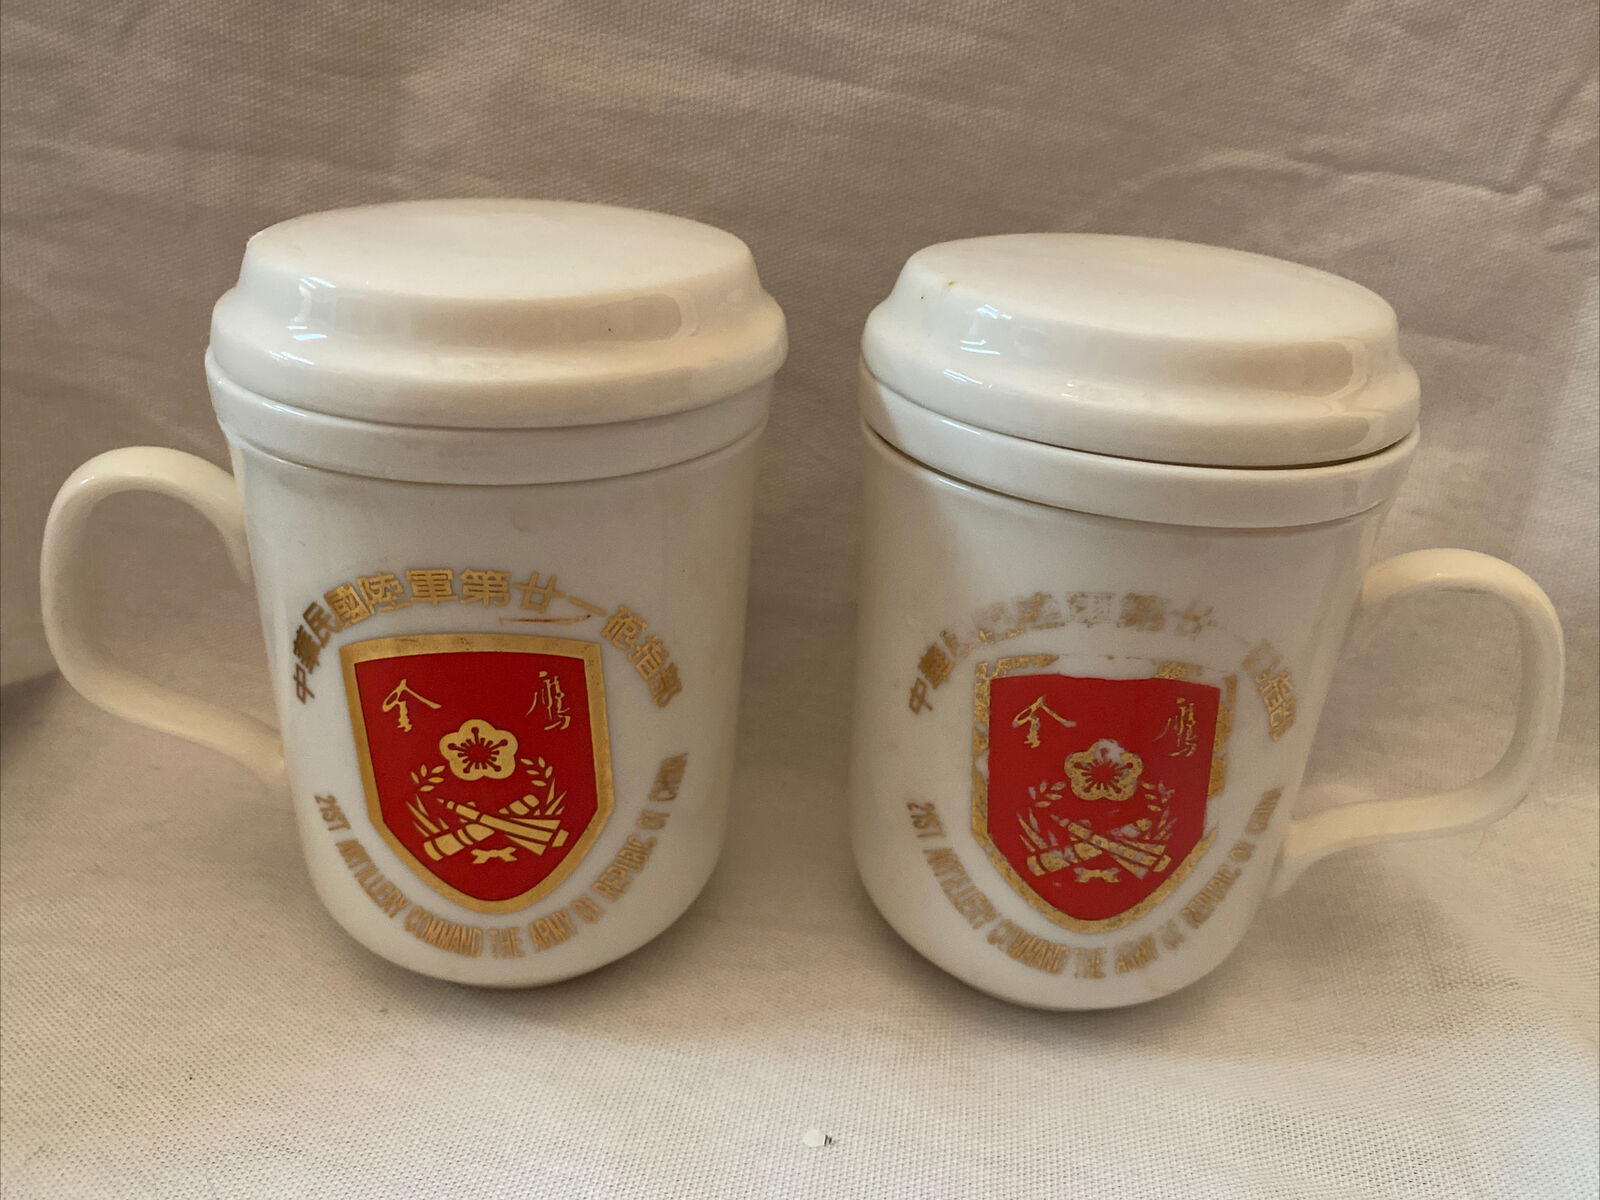 Two 21st Artillery Command The Army Of Republic Of China Tea Infuser Cups.